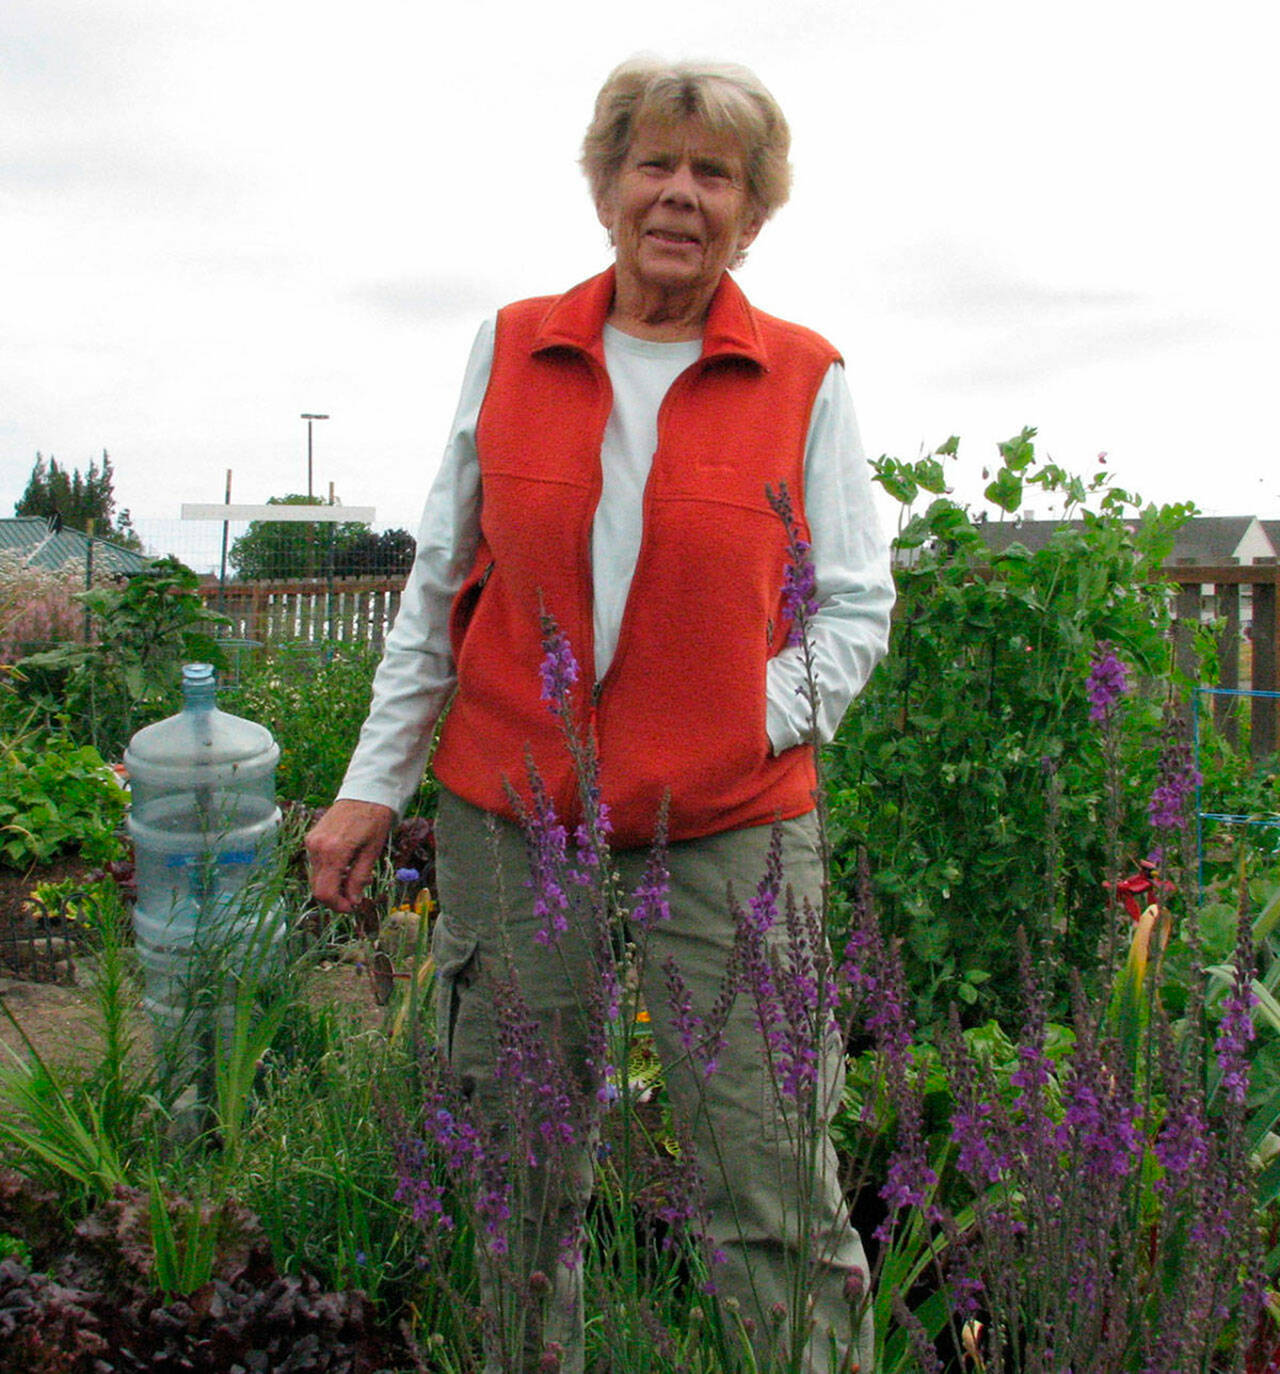 Photo courtesy Clallam County Master Gardeners
A Celebration of Life for Pam Larsen, co-founder of the Community Organic Garden of Sequim, is set for Saturday in the garden at 3 p.m. She helped start the Fir Street garden in 2008.